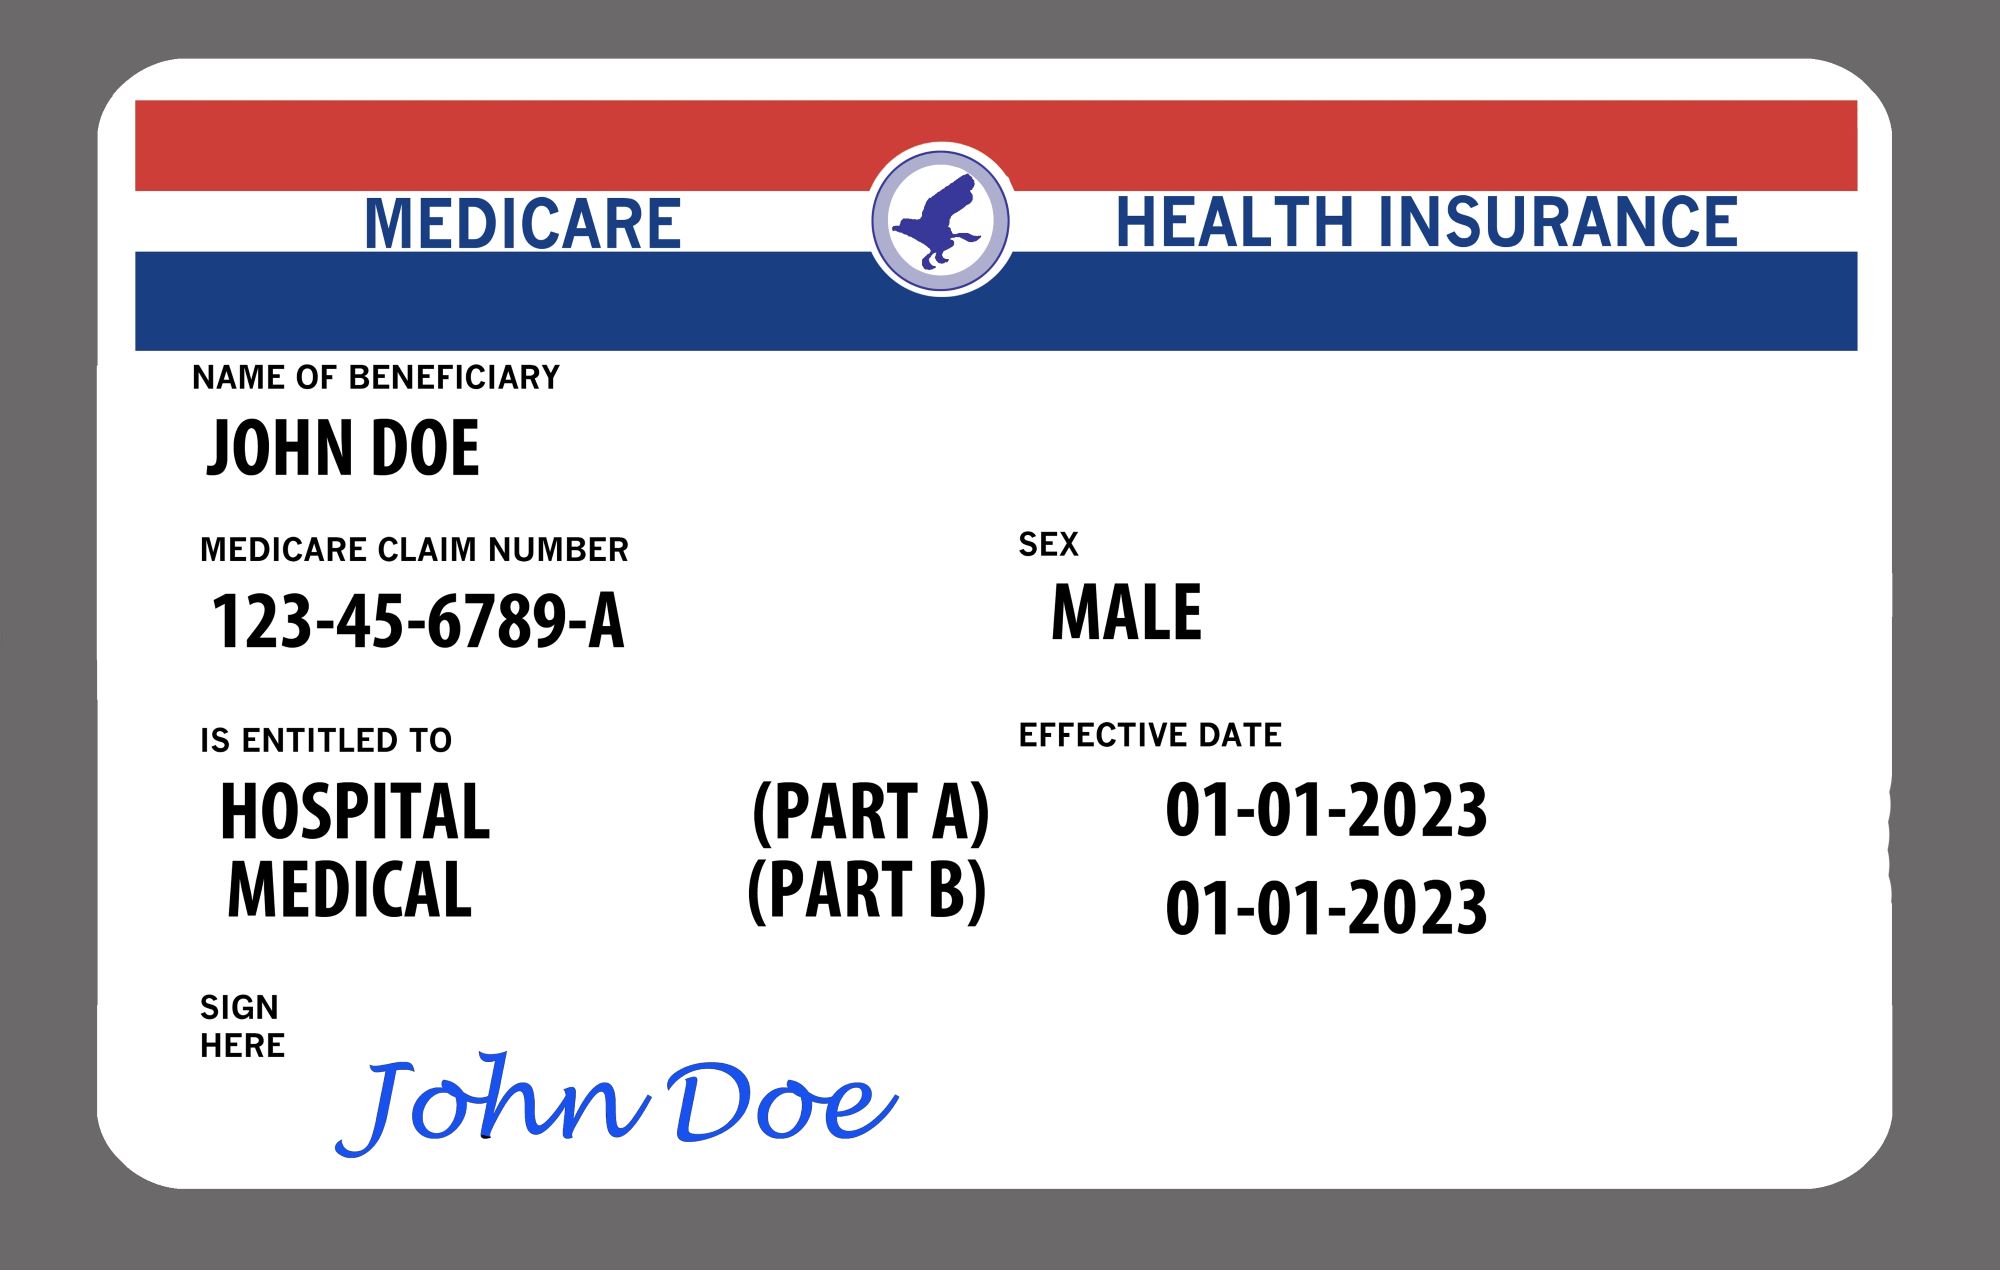 Medicare card, large, with the name John Doe, just an example of a Medicare card